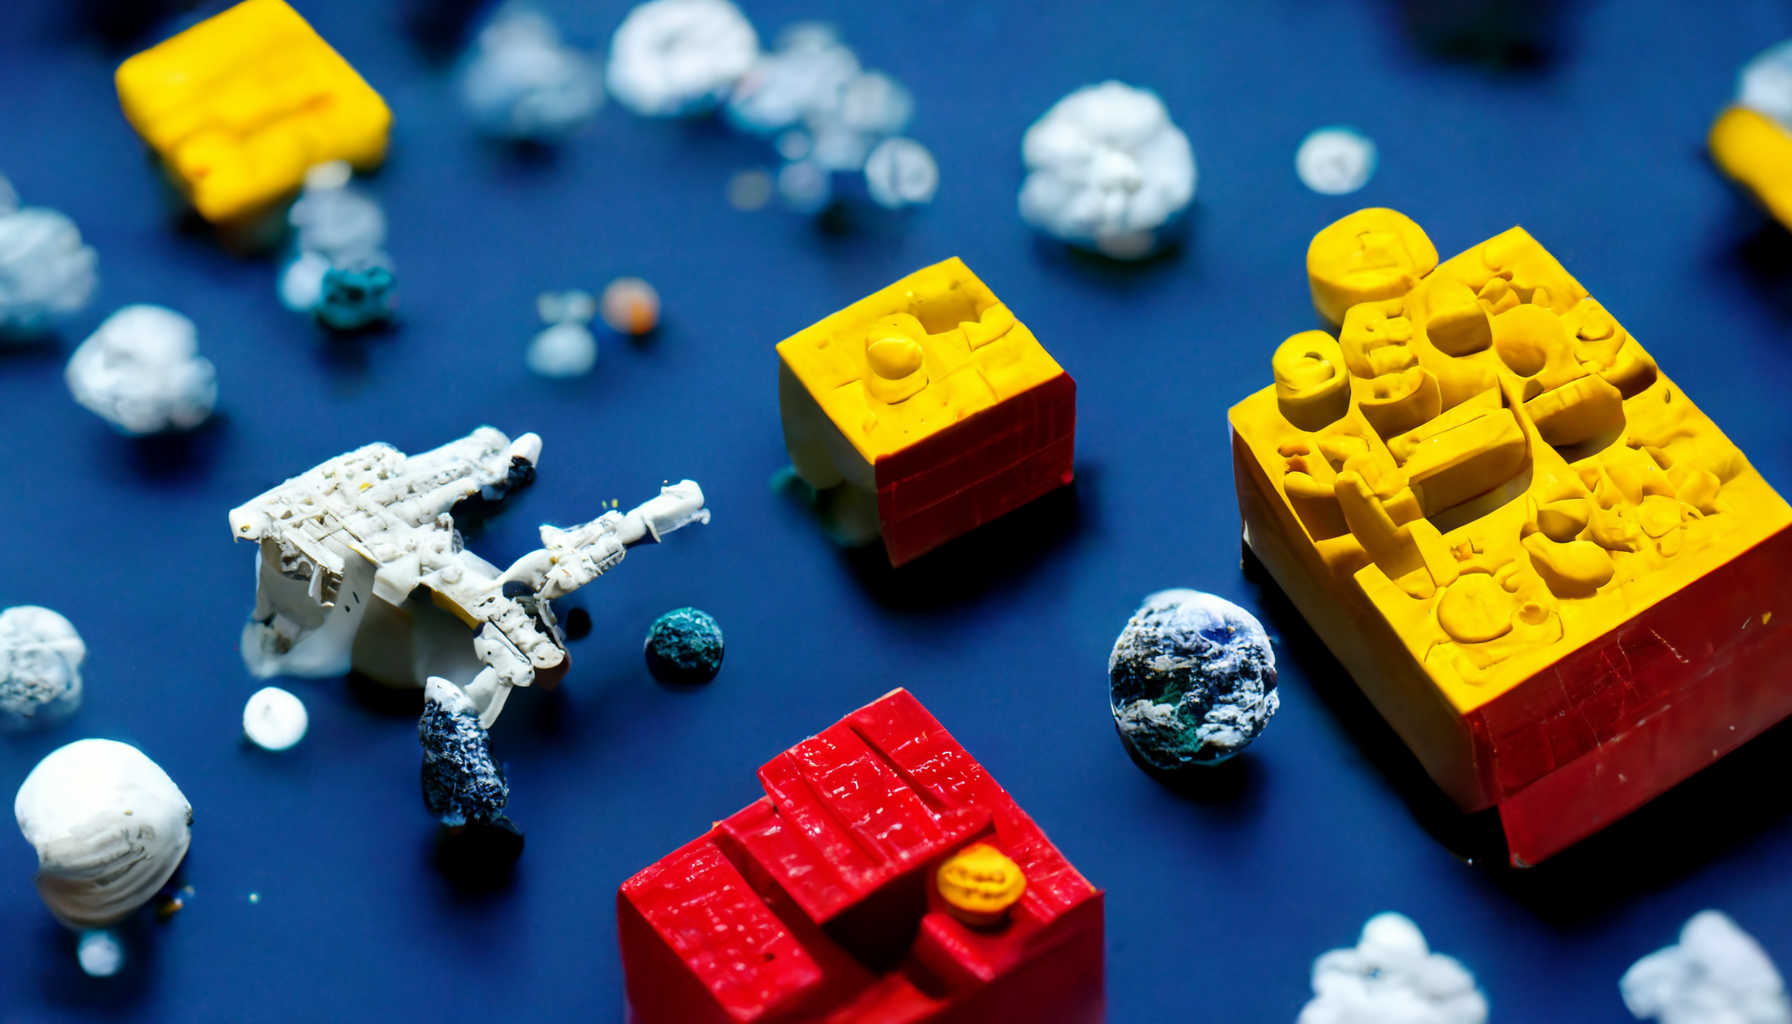 The universe building the world out of lego (Midjourney)